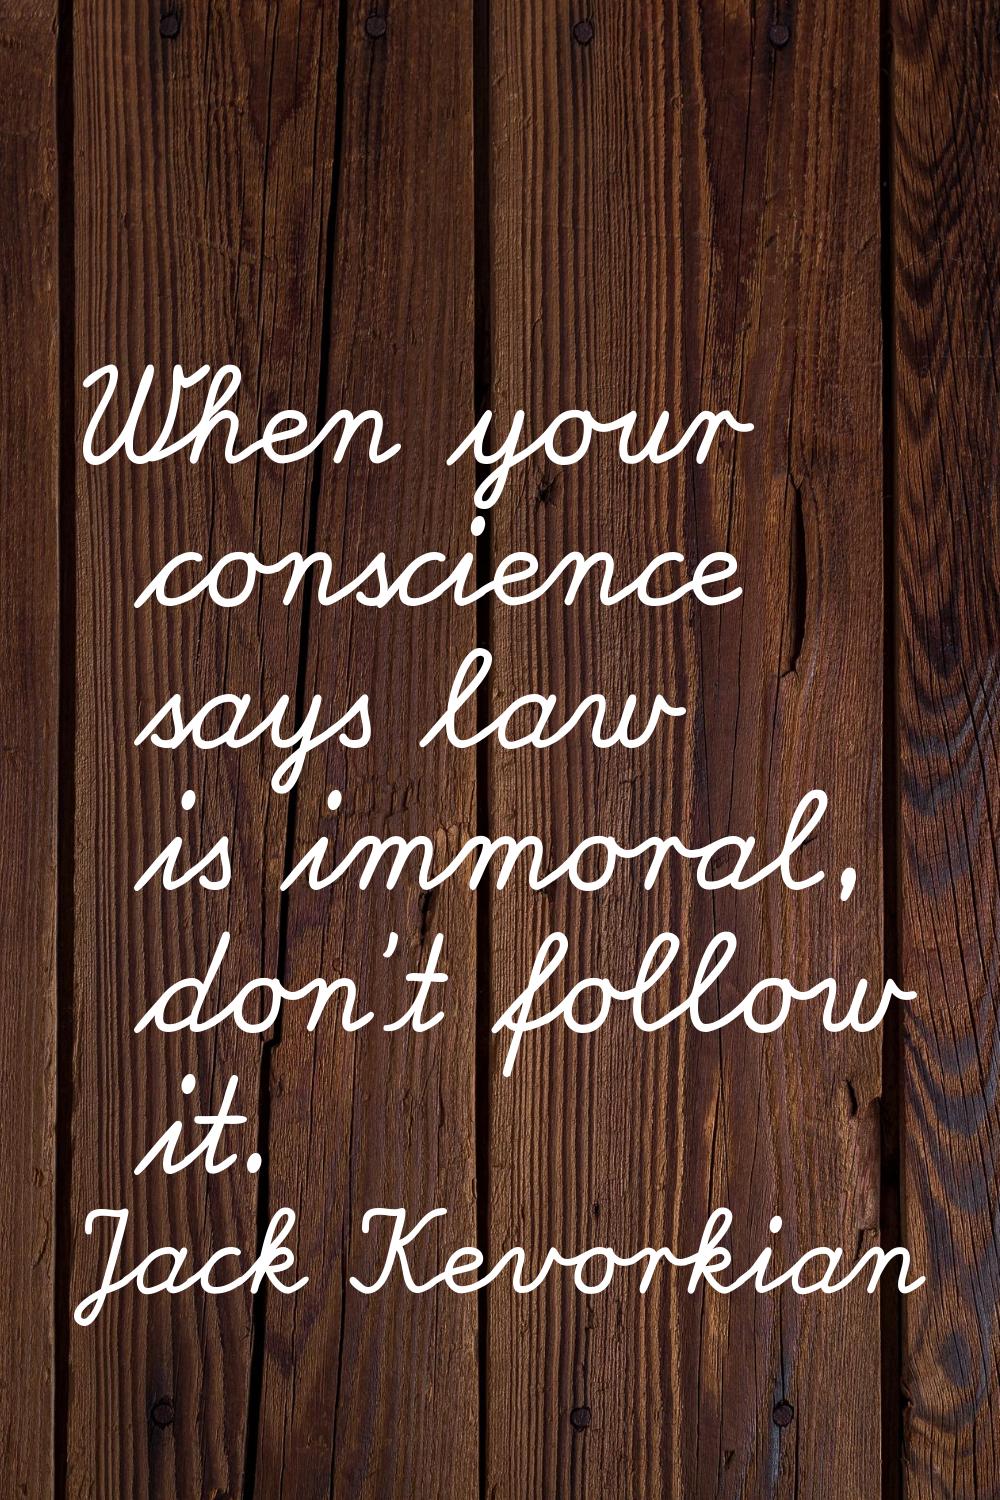 When your conscience says law is immoral, don't follow it.